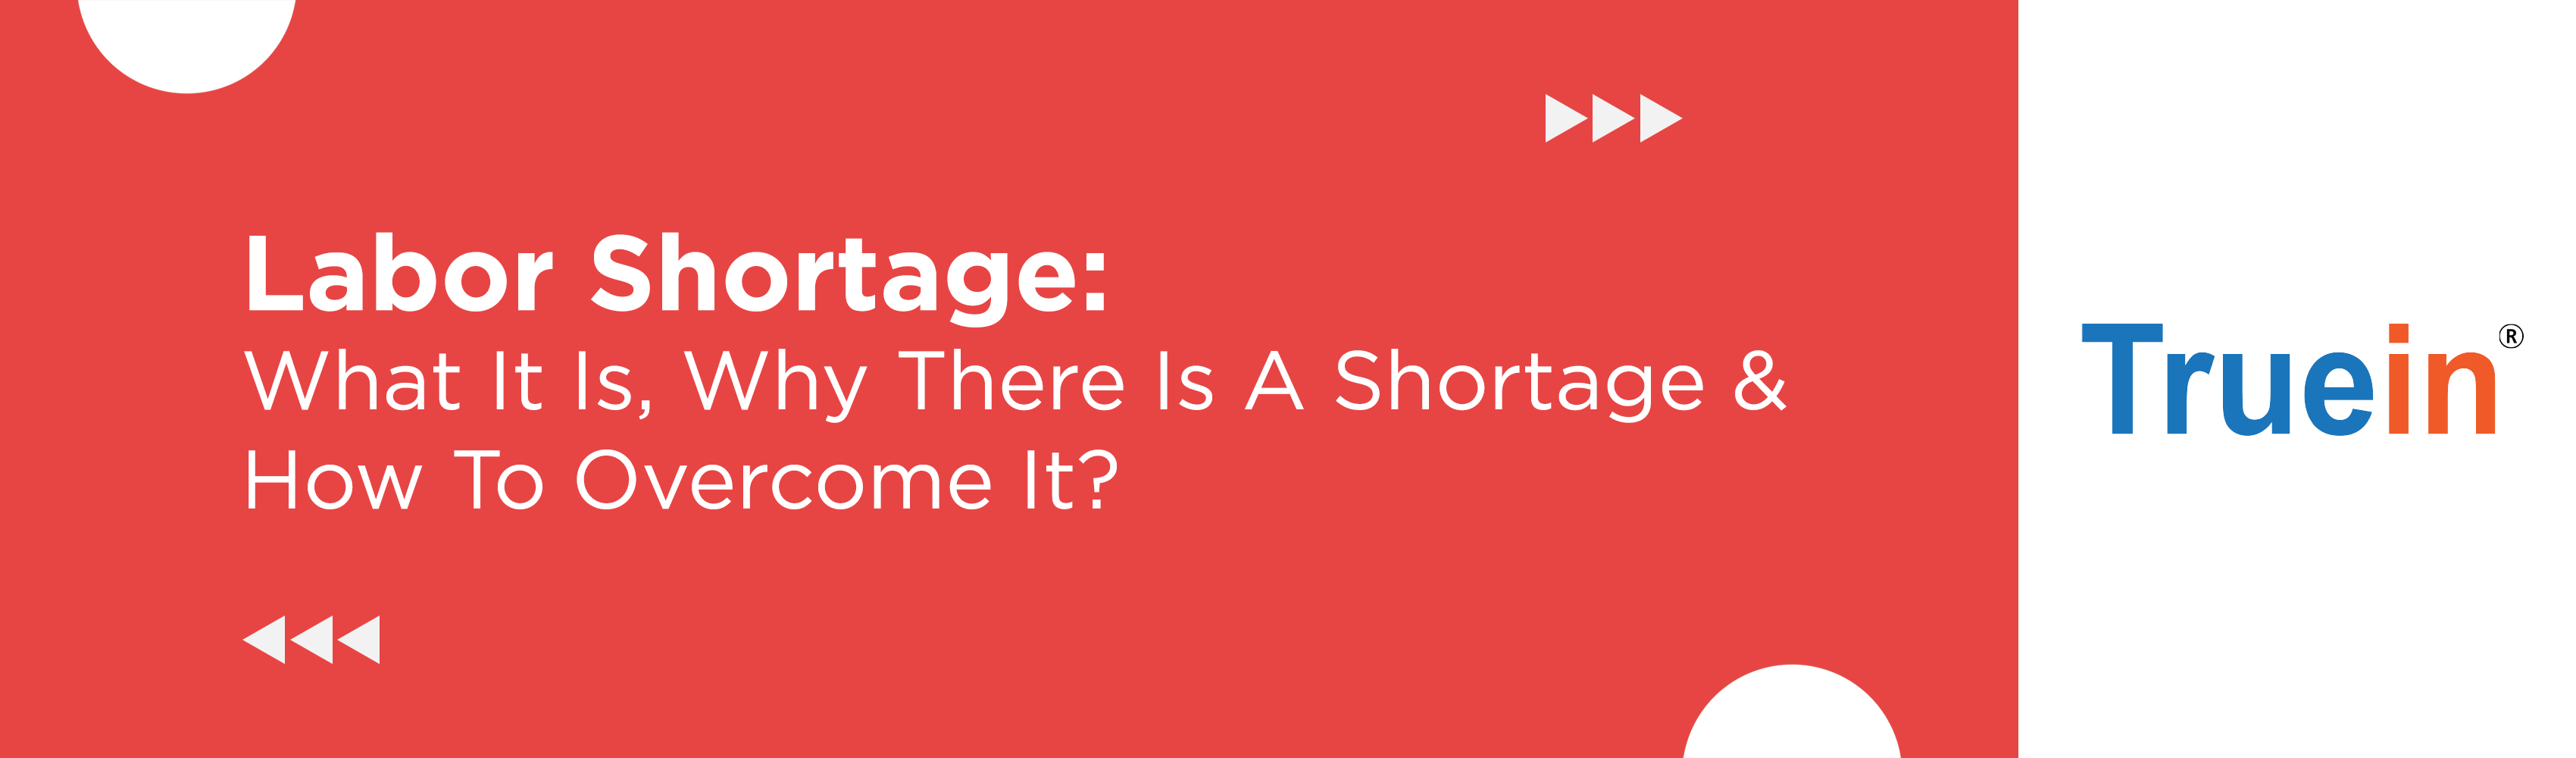 Labor Shortage: What It Is, Why There Is A Shortage & How To Overcome It?